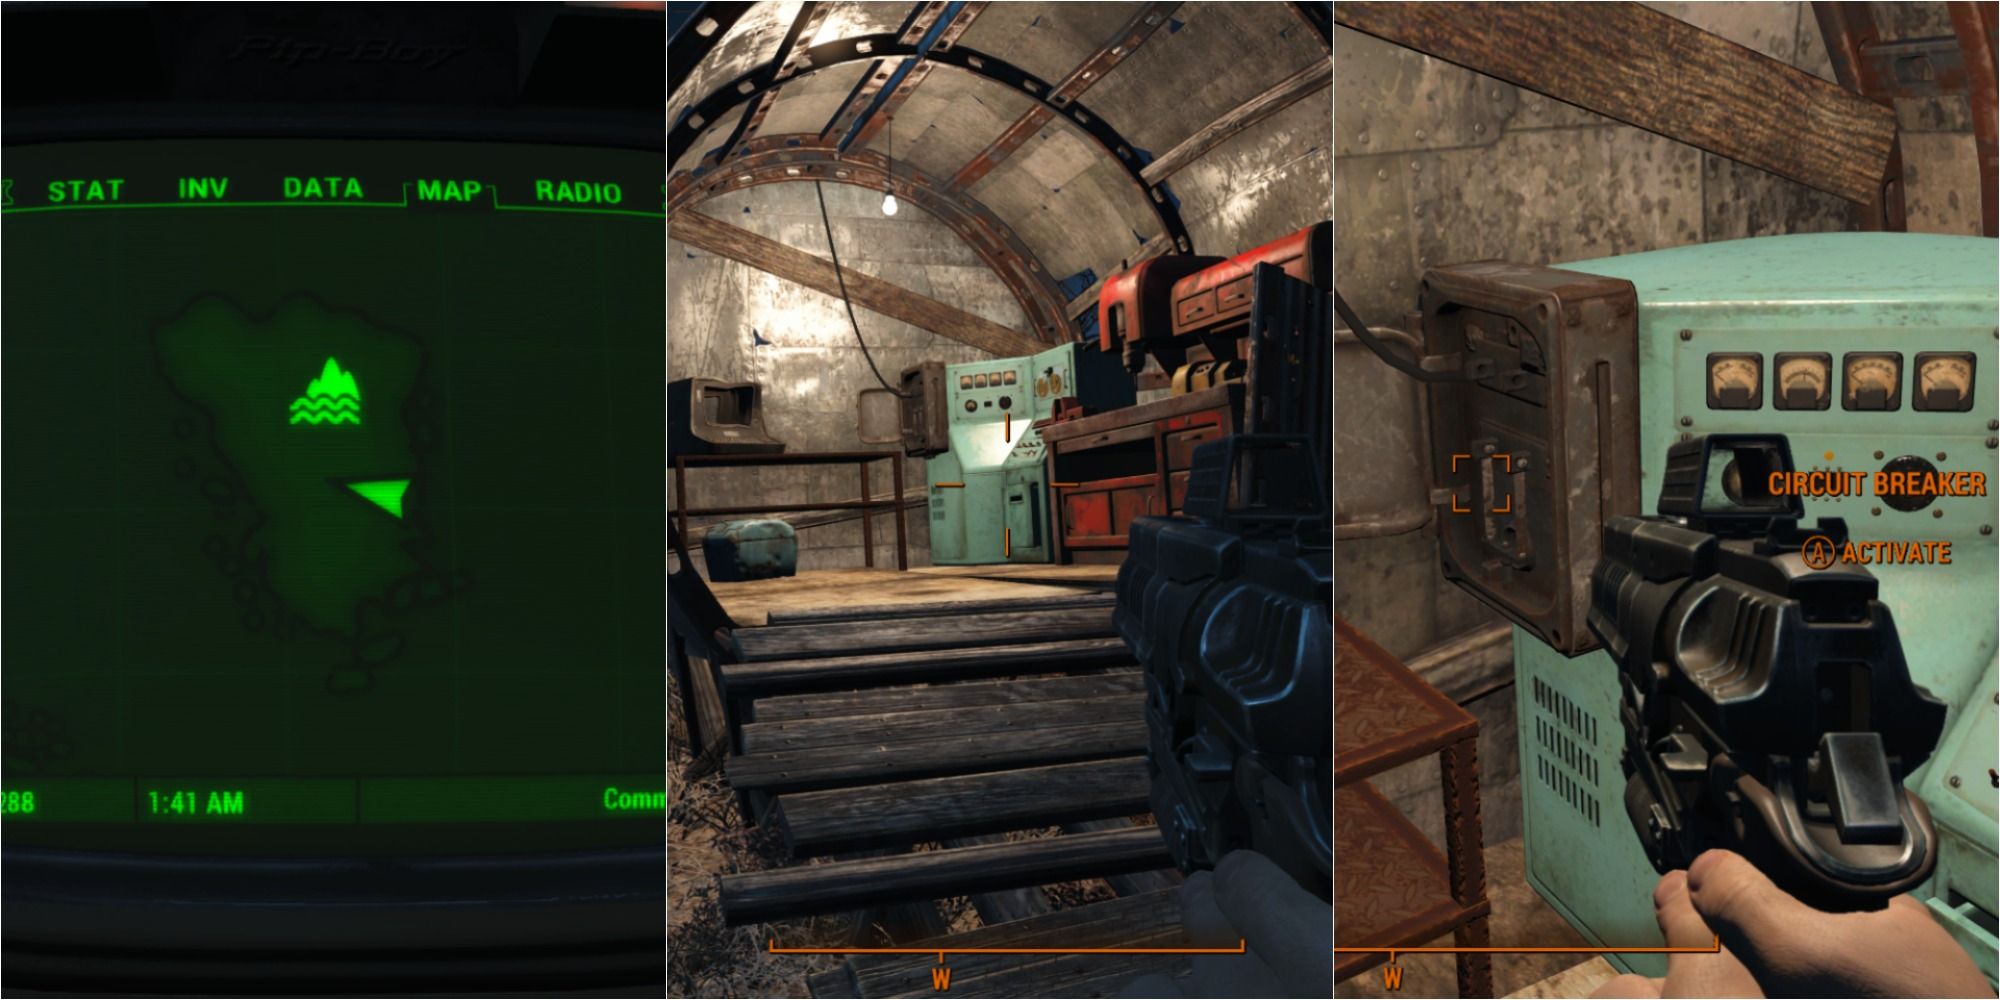 Fallout 4 Split Image Showing Circuit Board By Workbench